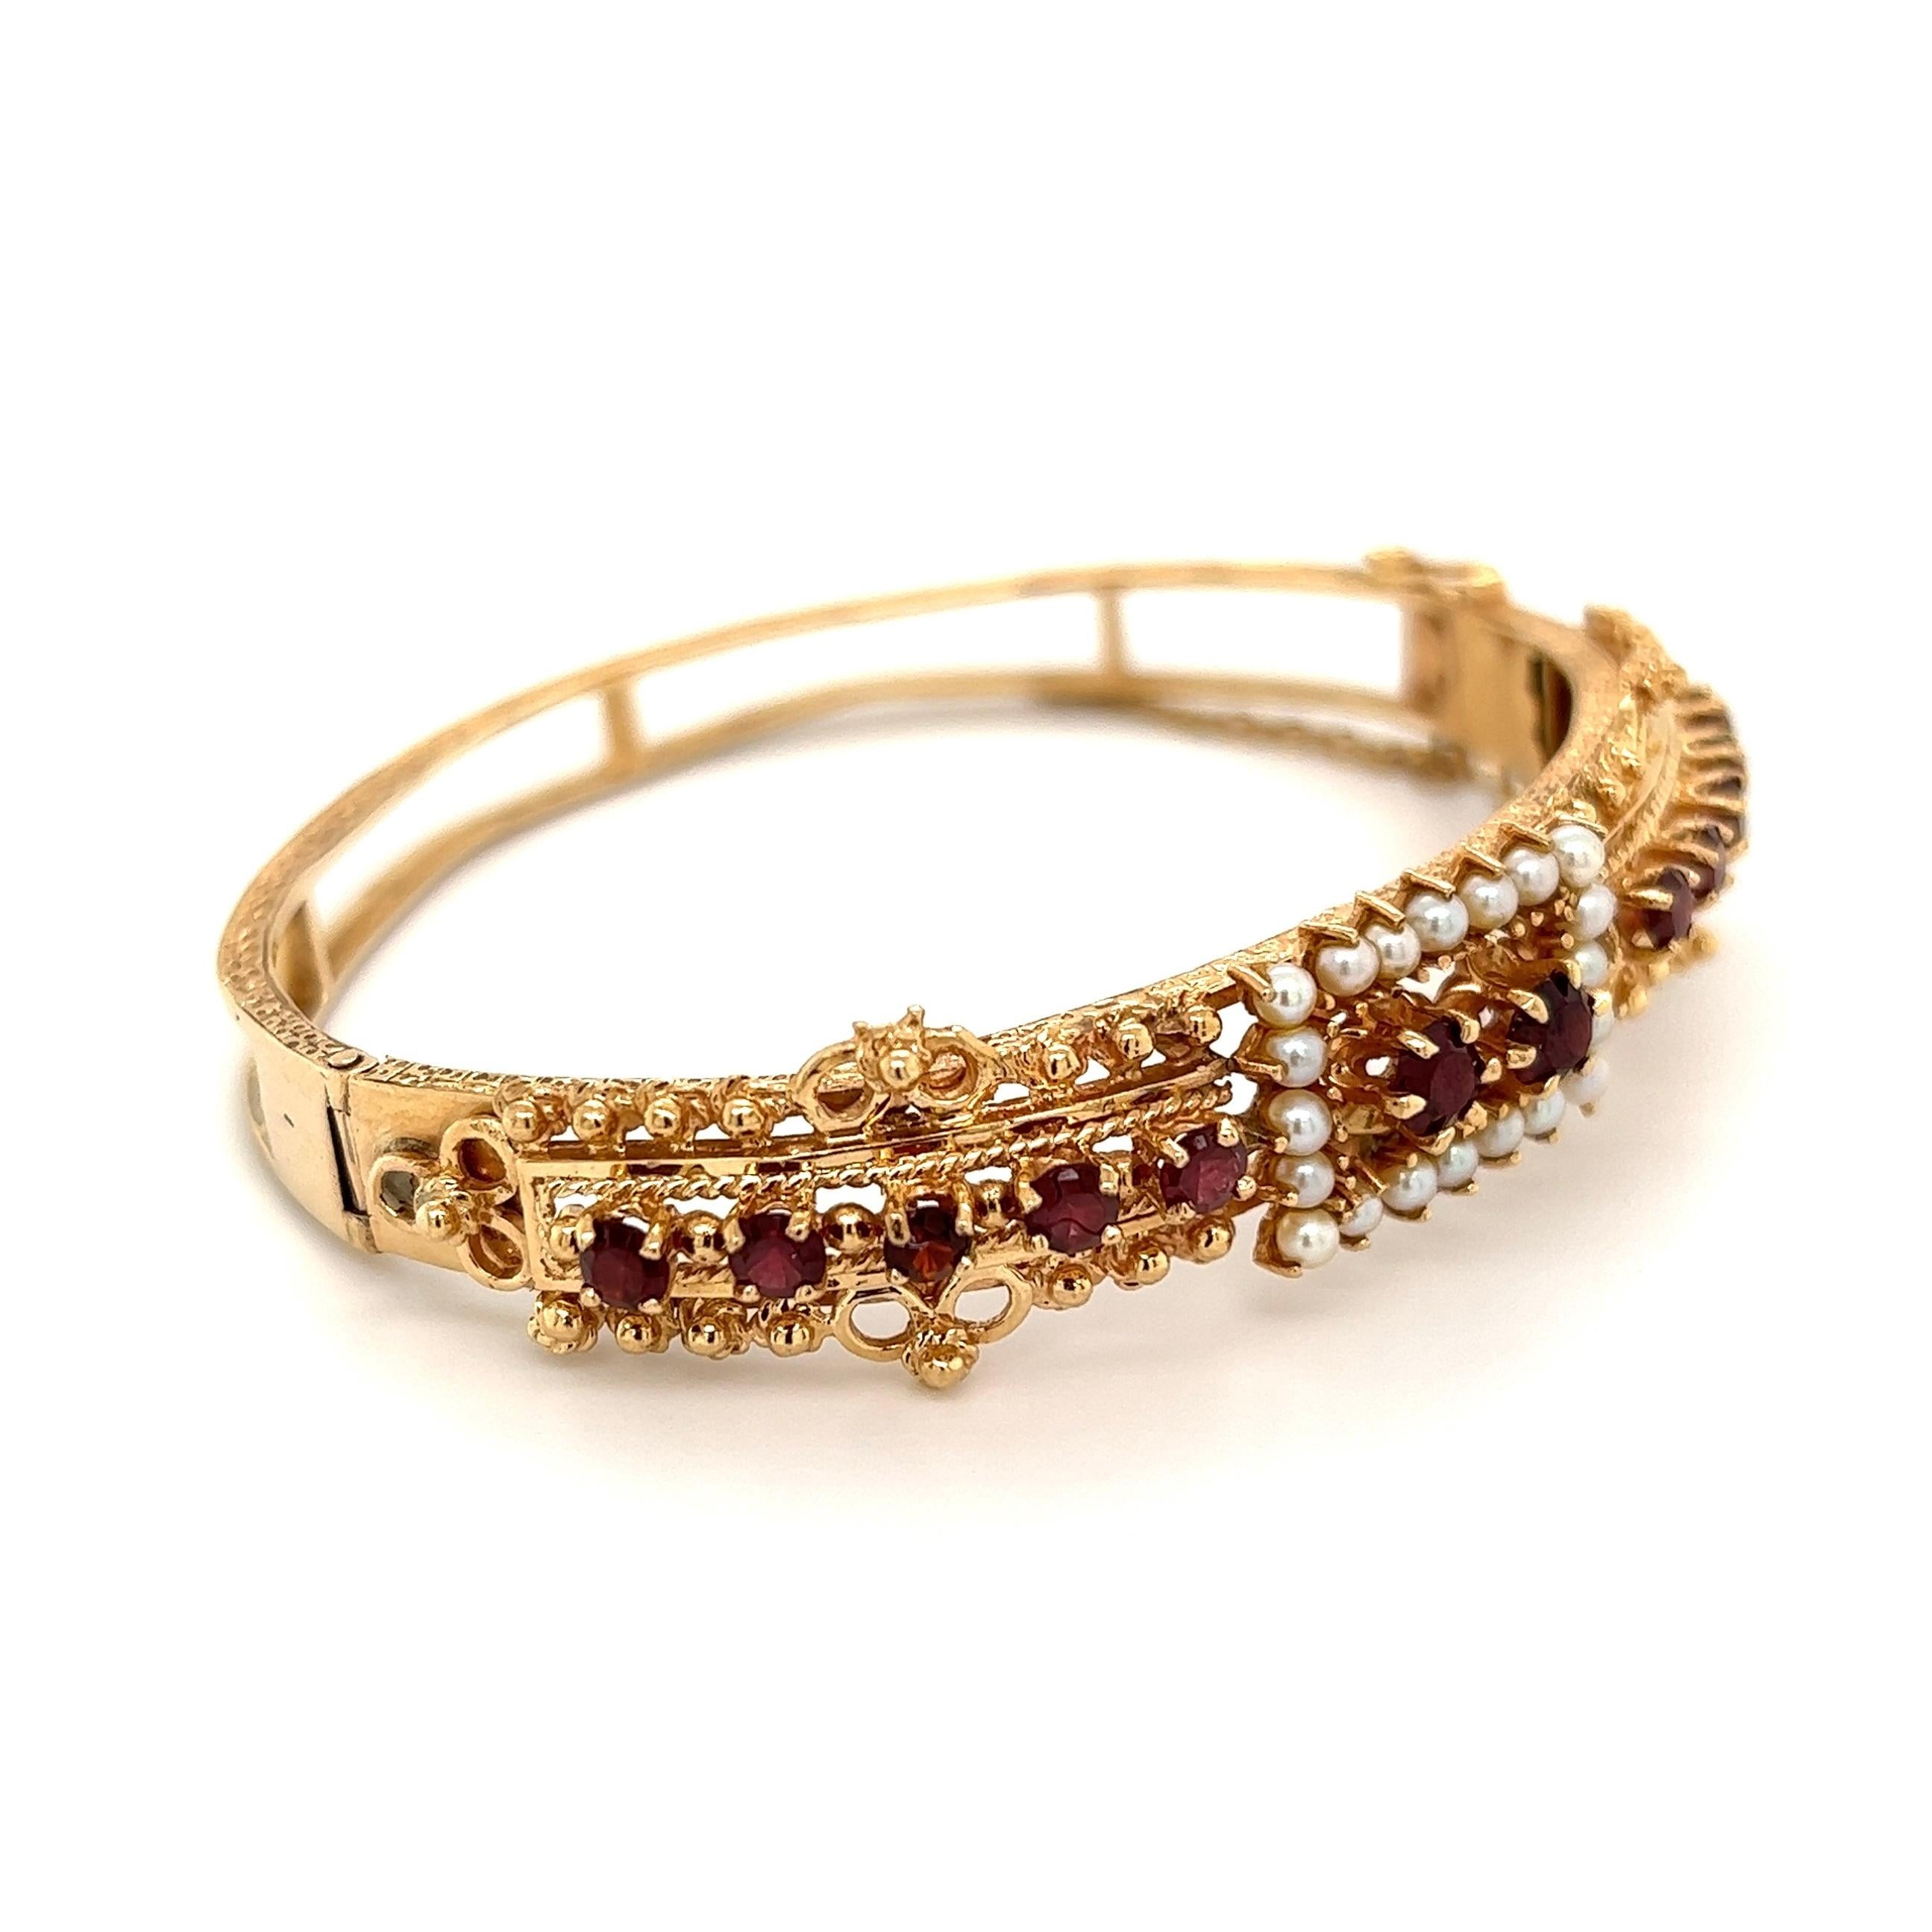 Simply Beautiful! Finely detailed Victorian Revival Hinged Cuff Bangle Bracelet. Hand set with Garnets and Seed Pearls. Hand crafted in 14 Karat Yellow Gold. Approx. Dimensions: 2.35” l x 2.66” w. The Bracelet is in excellent condition and was